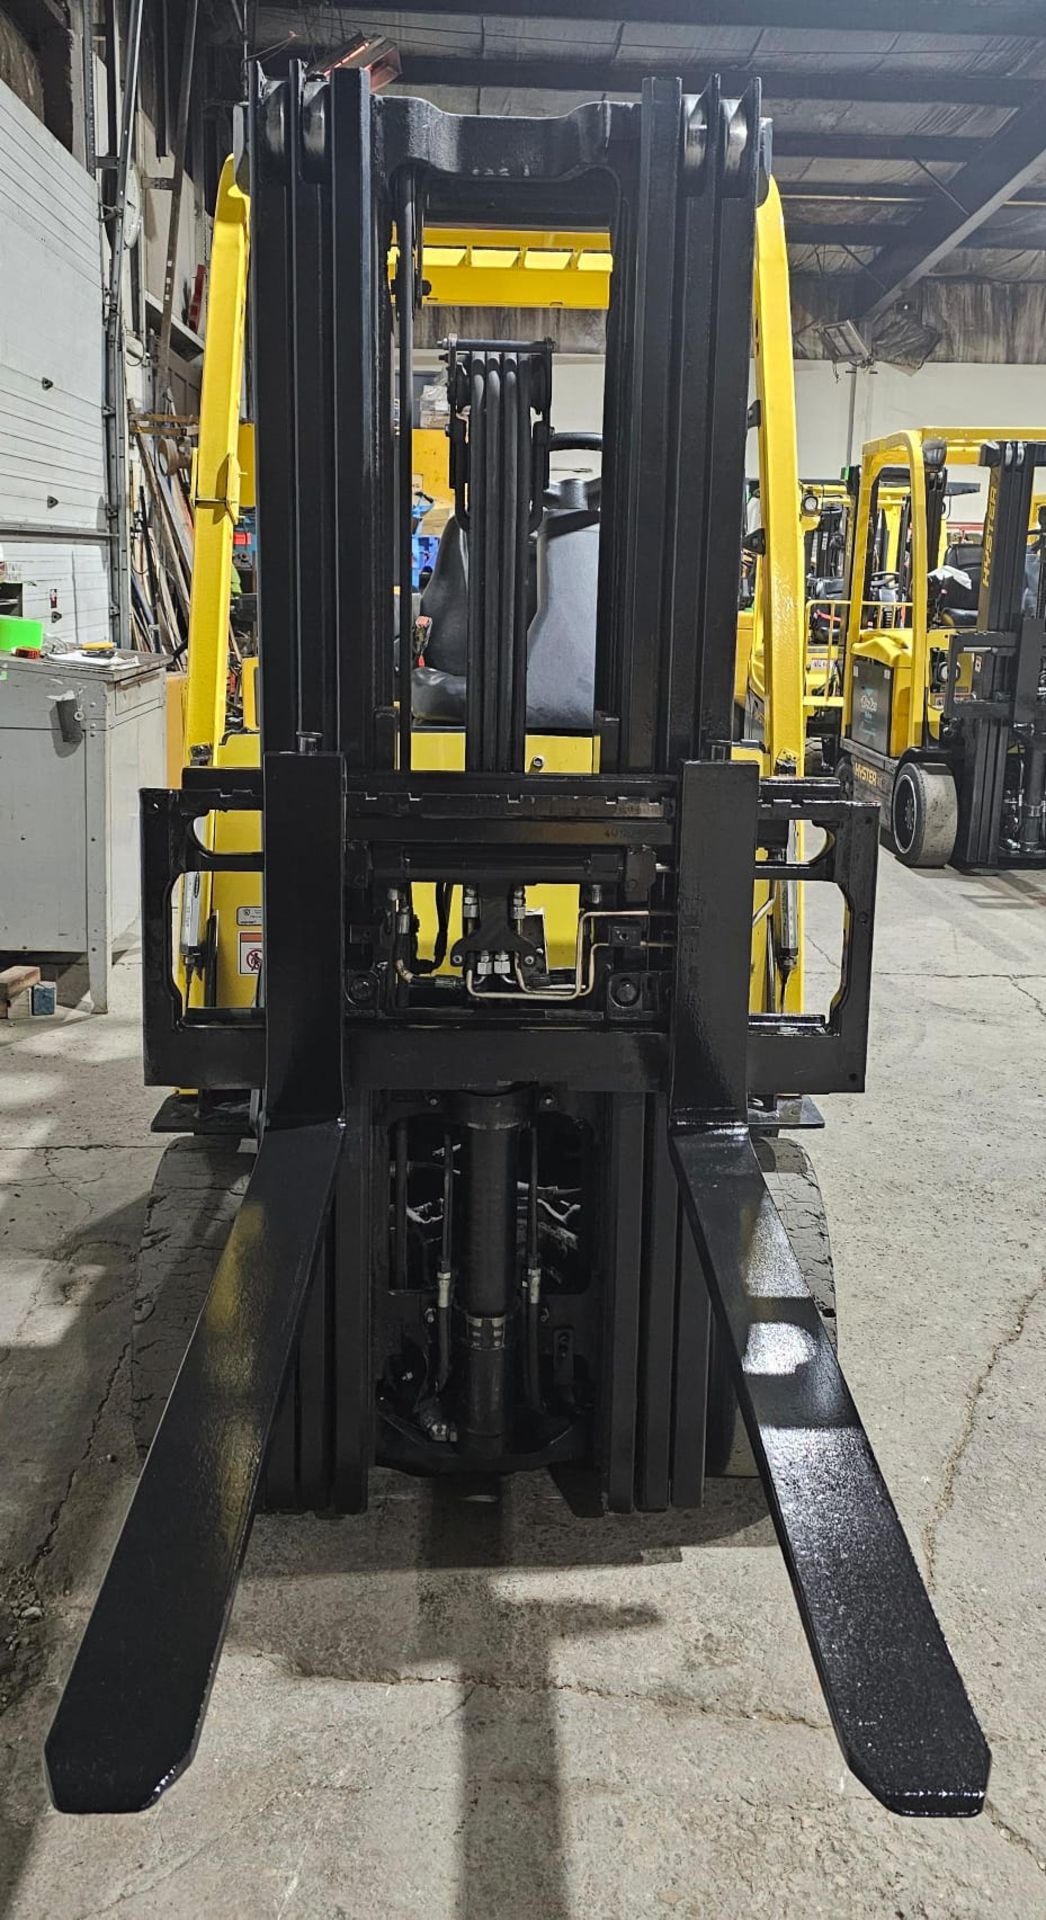 2015 Hyster 4,500lbs Capacity Forklift Electric 48V with sideshift & 3-STAGE MAST 189" load height - Image 7 of 7